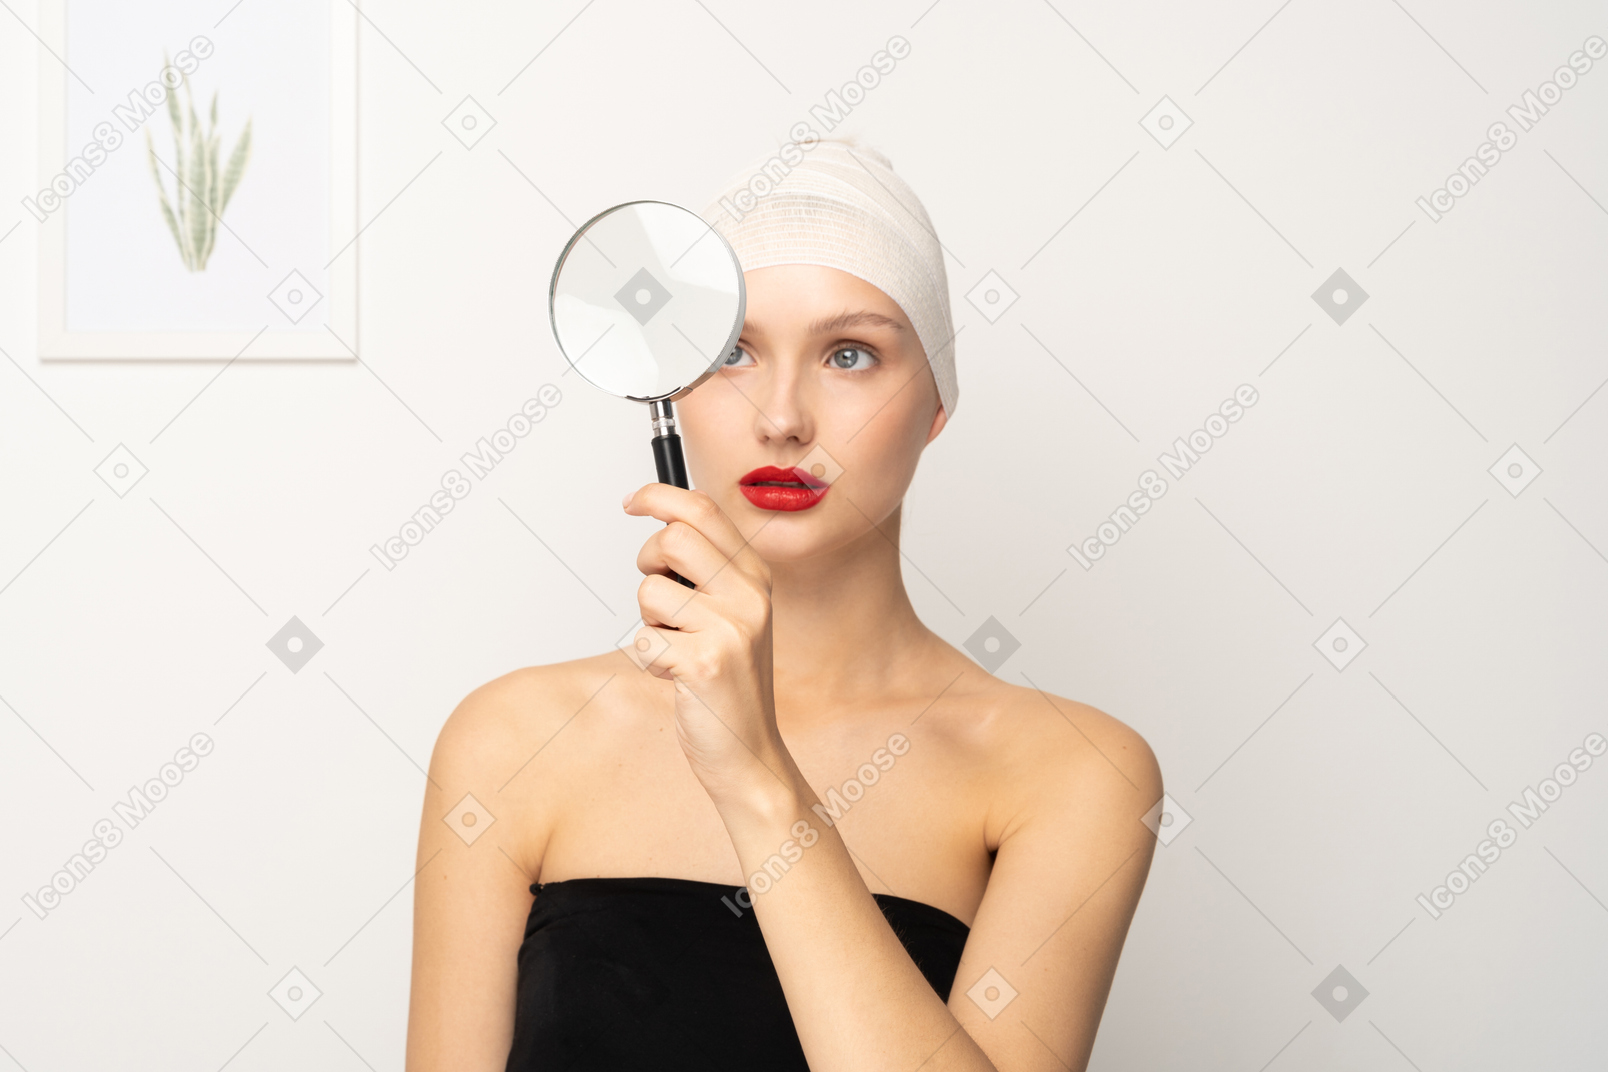 Young woman looking through magnifier